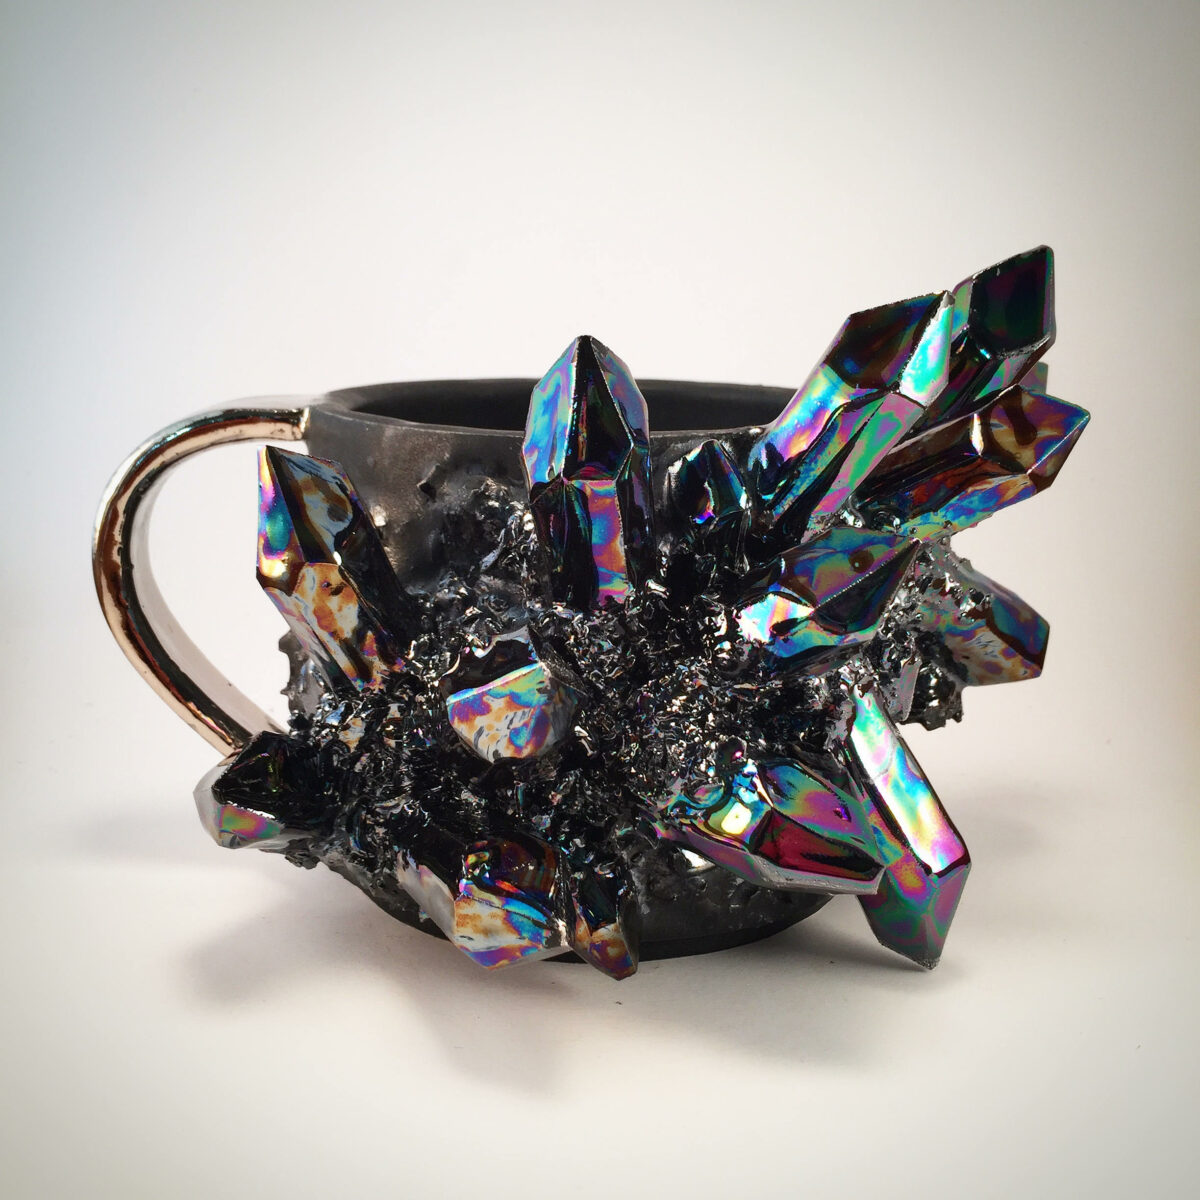 Lush Ceramic Vessels Decorated With Colorful Crystals By Collin Lynch 5 1